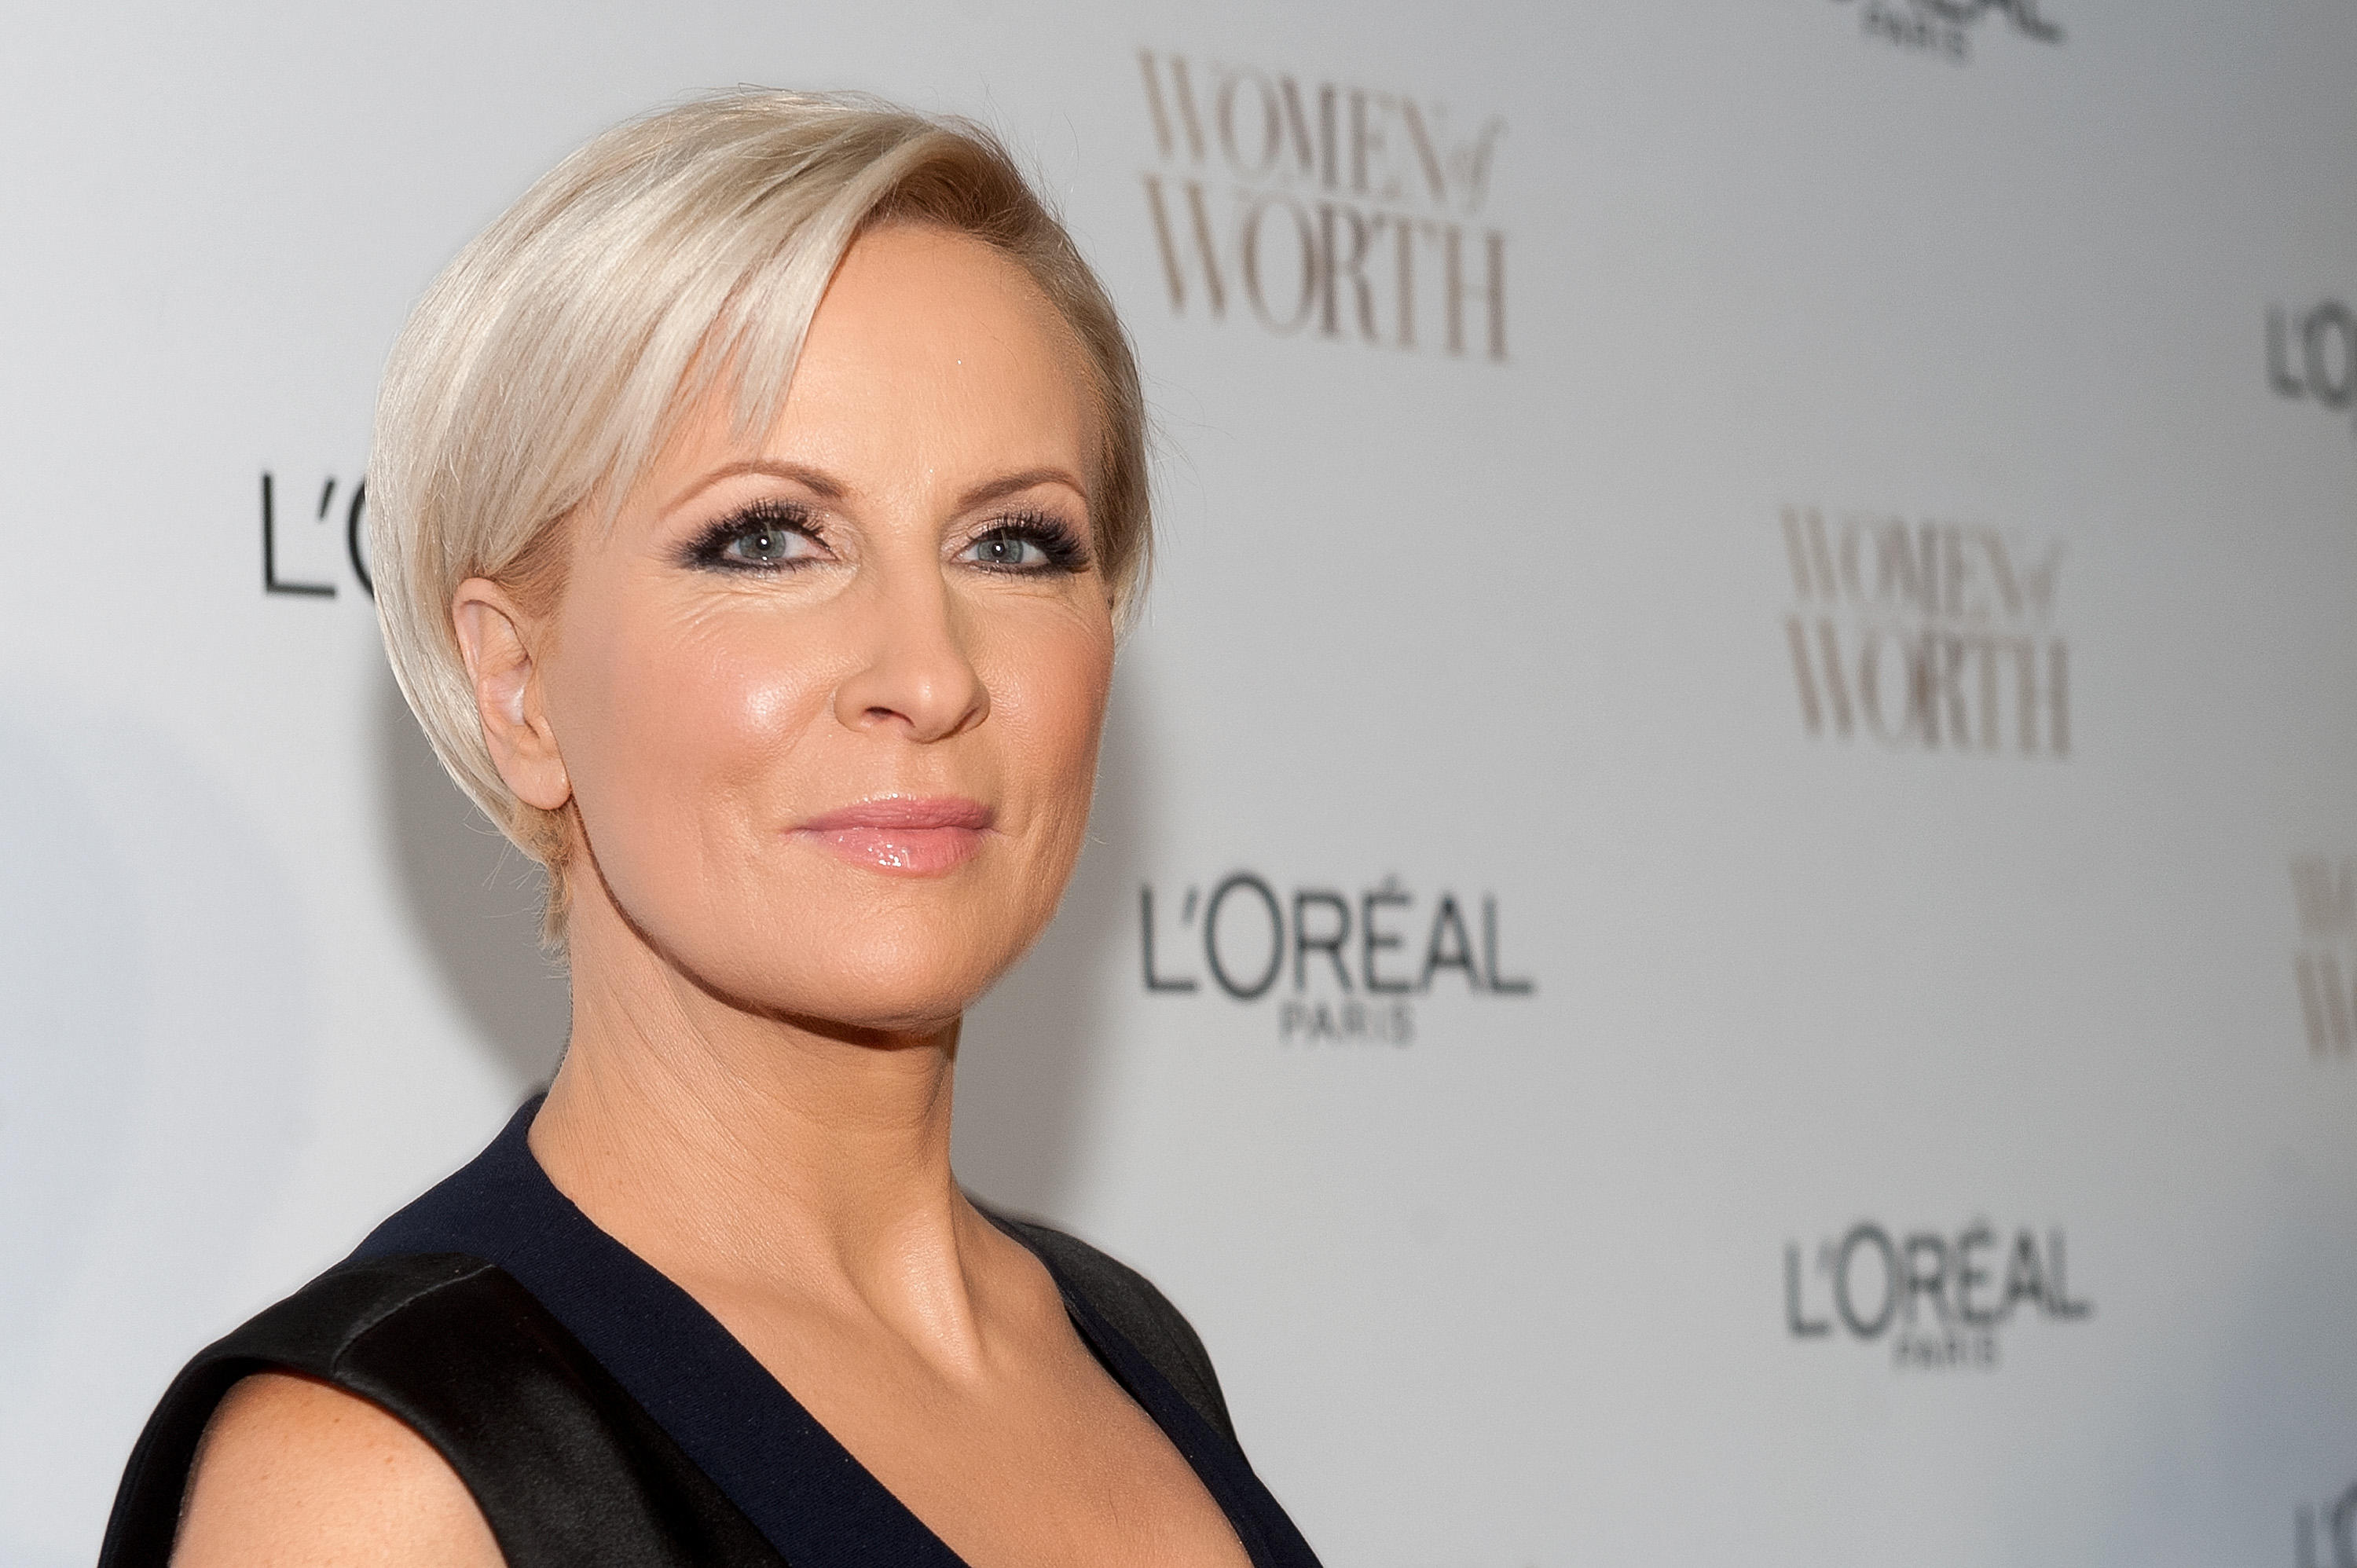 An Interview with Mika Brzezinski, co-host of MSNBC’s Morning Joe.